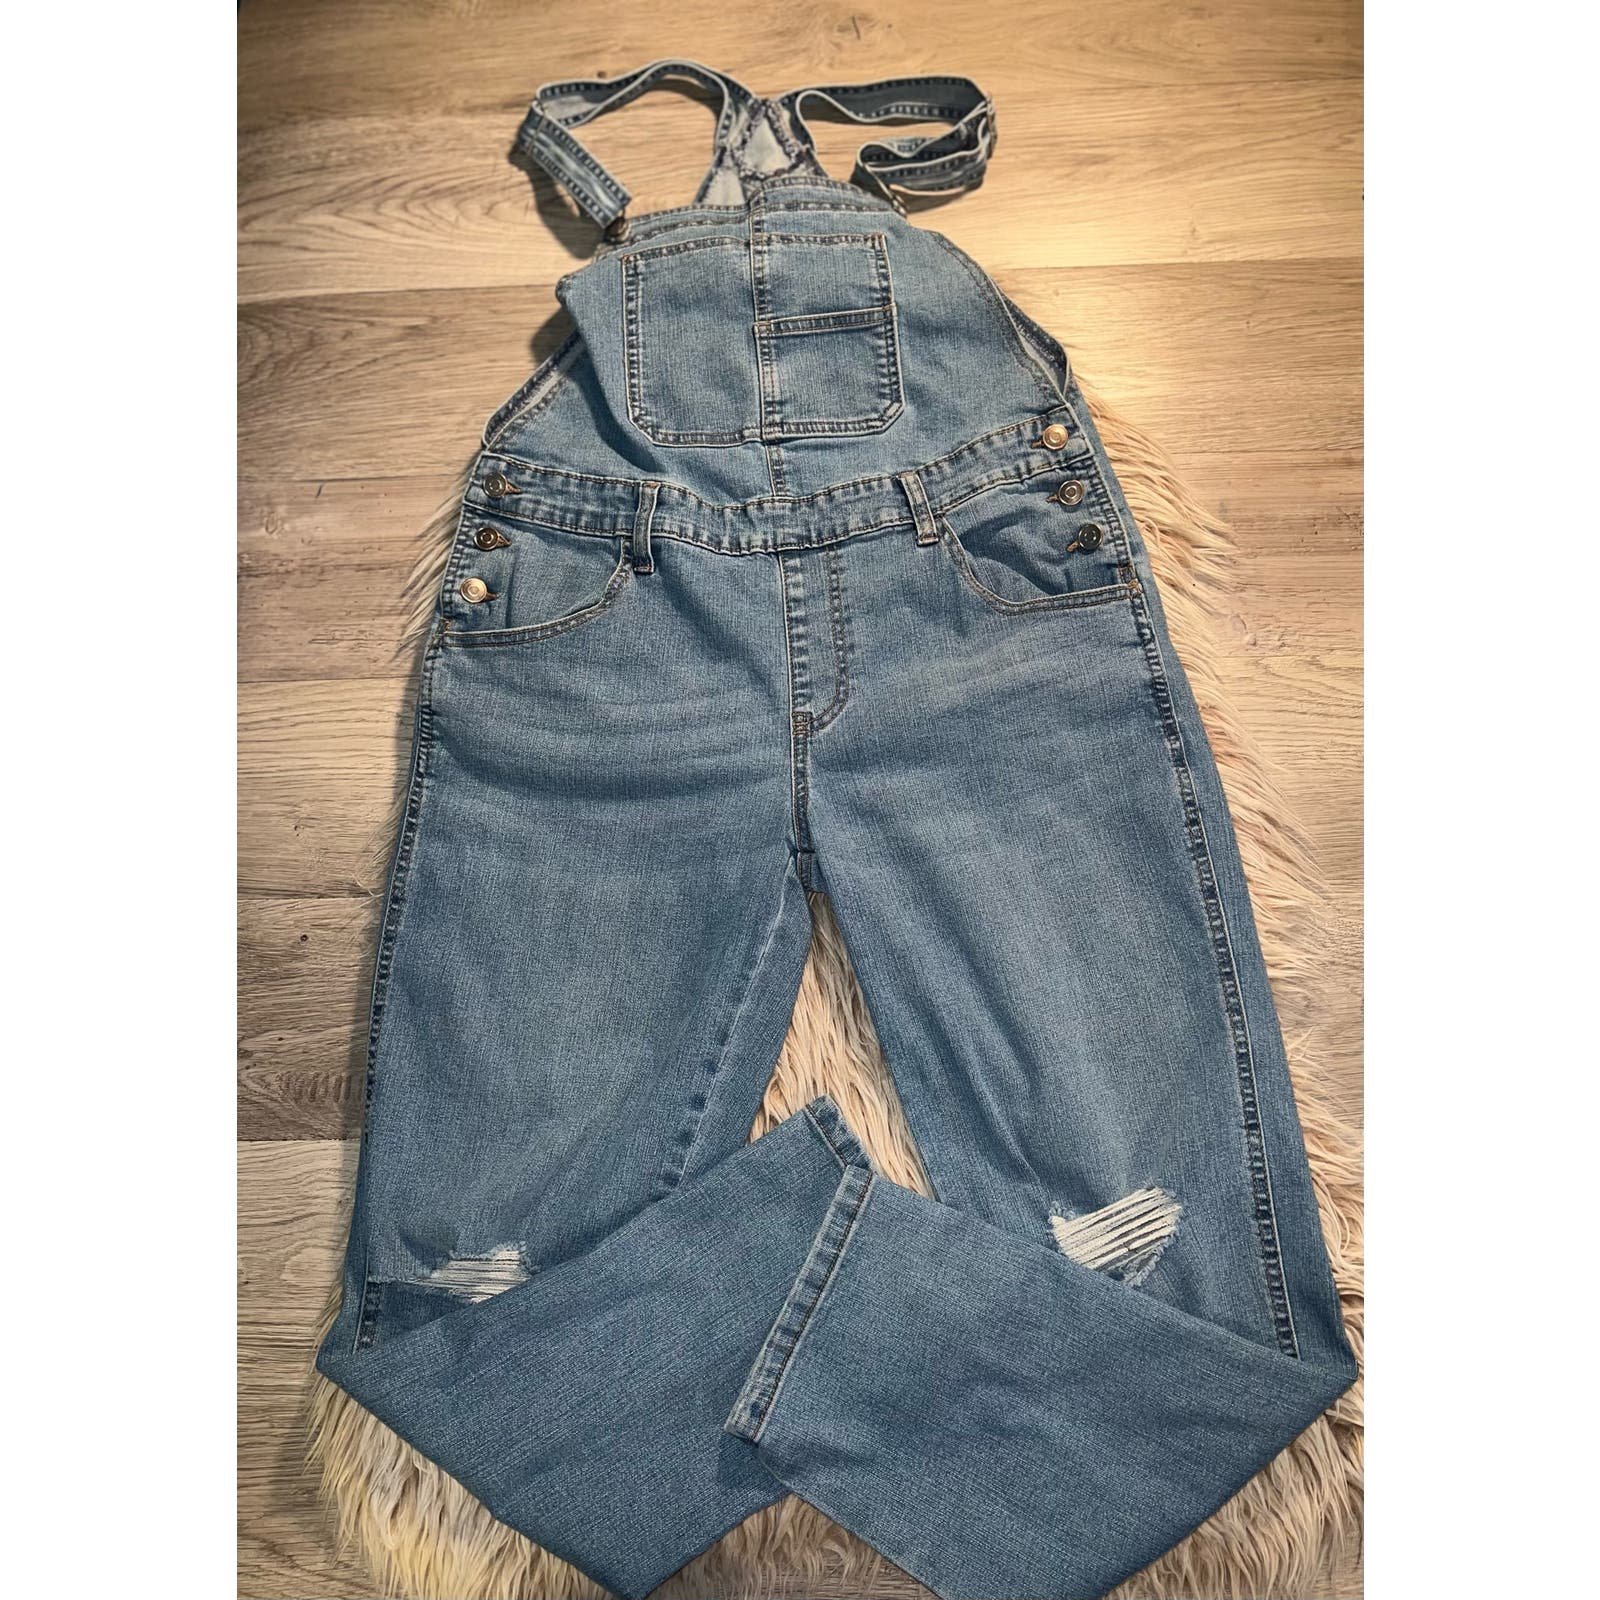 cheapest place to buy  Celebrity pink women’s distressed blue jean overalls OIfA2UpSa Counter Genuine 